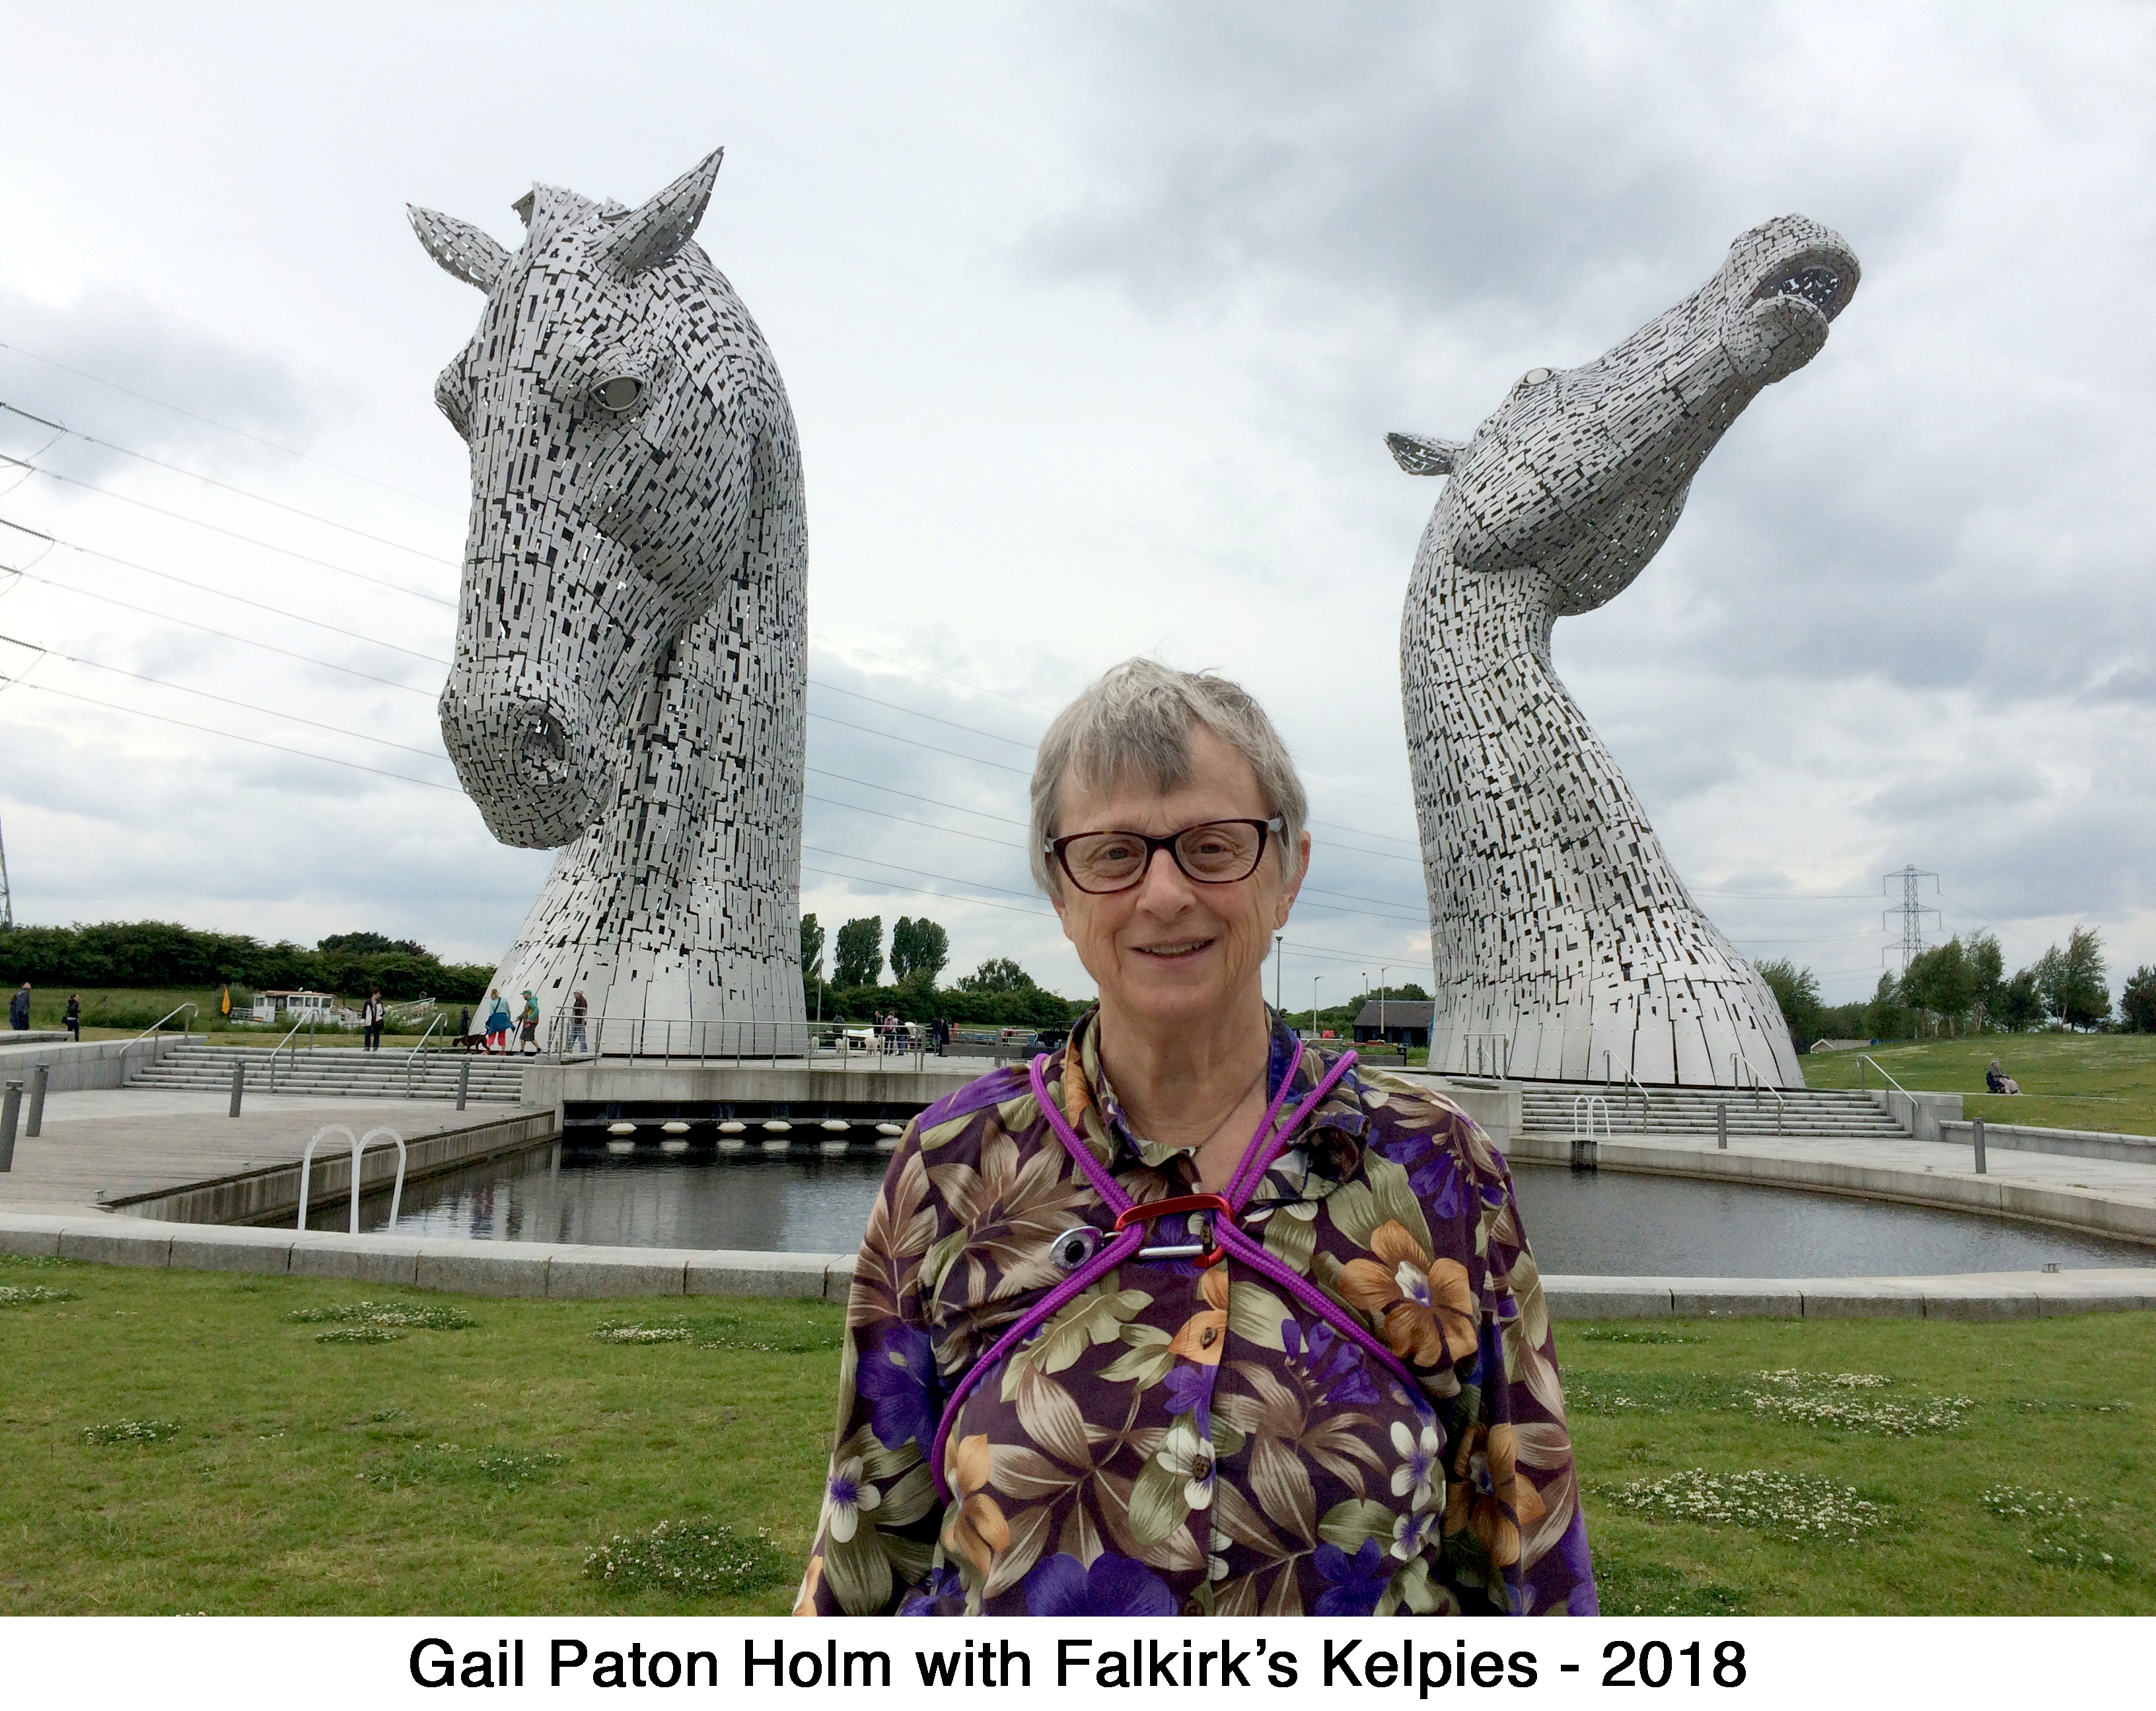 Gail Holm in front of the large horse head sculptures in Falkirk, Scotland